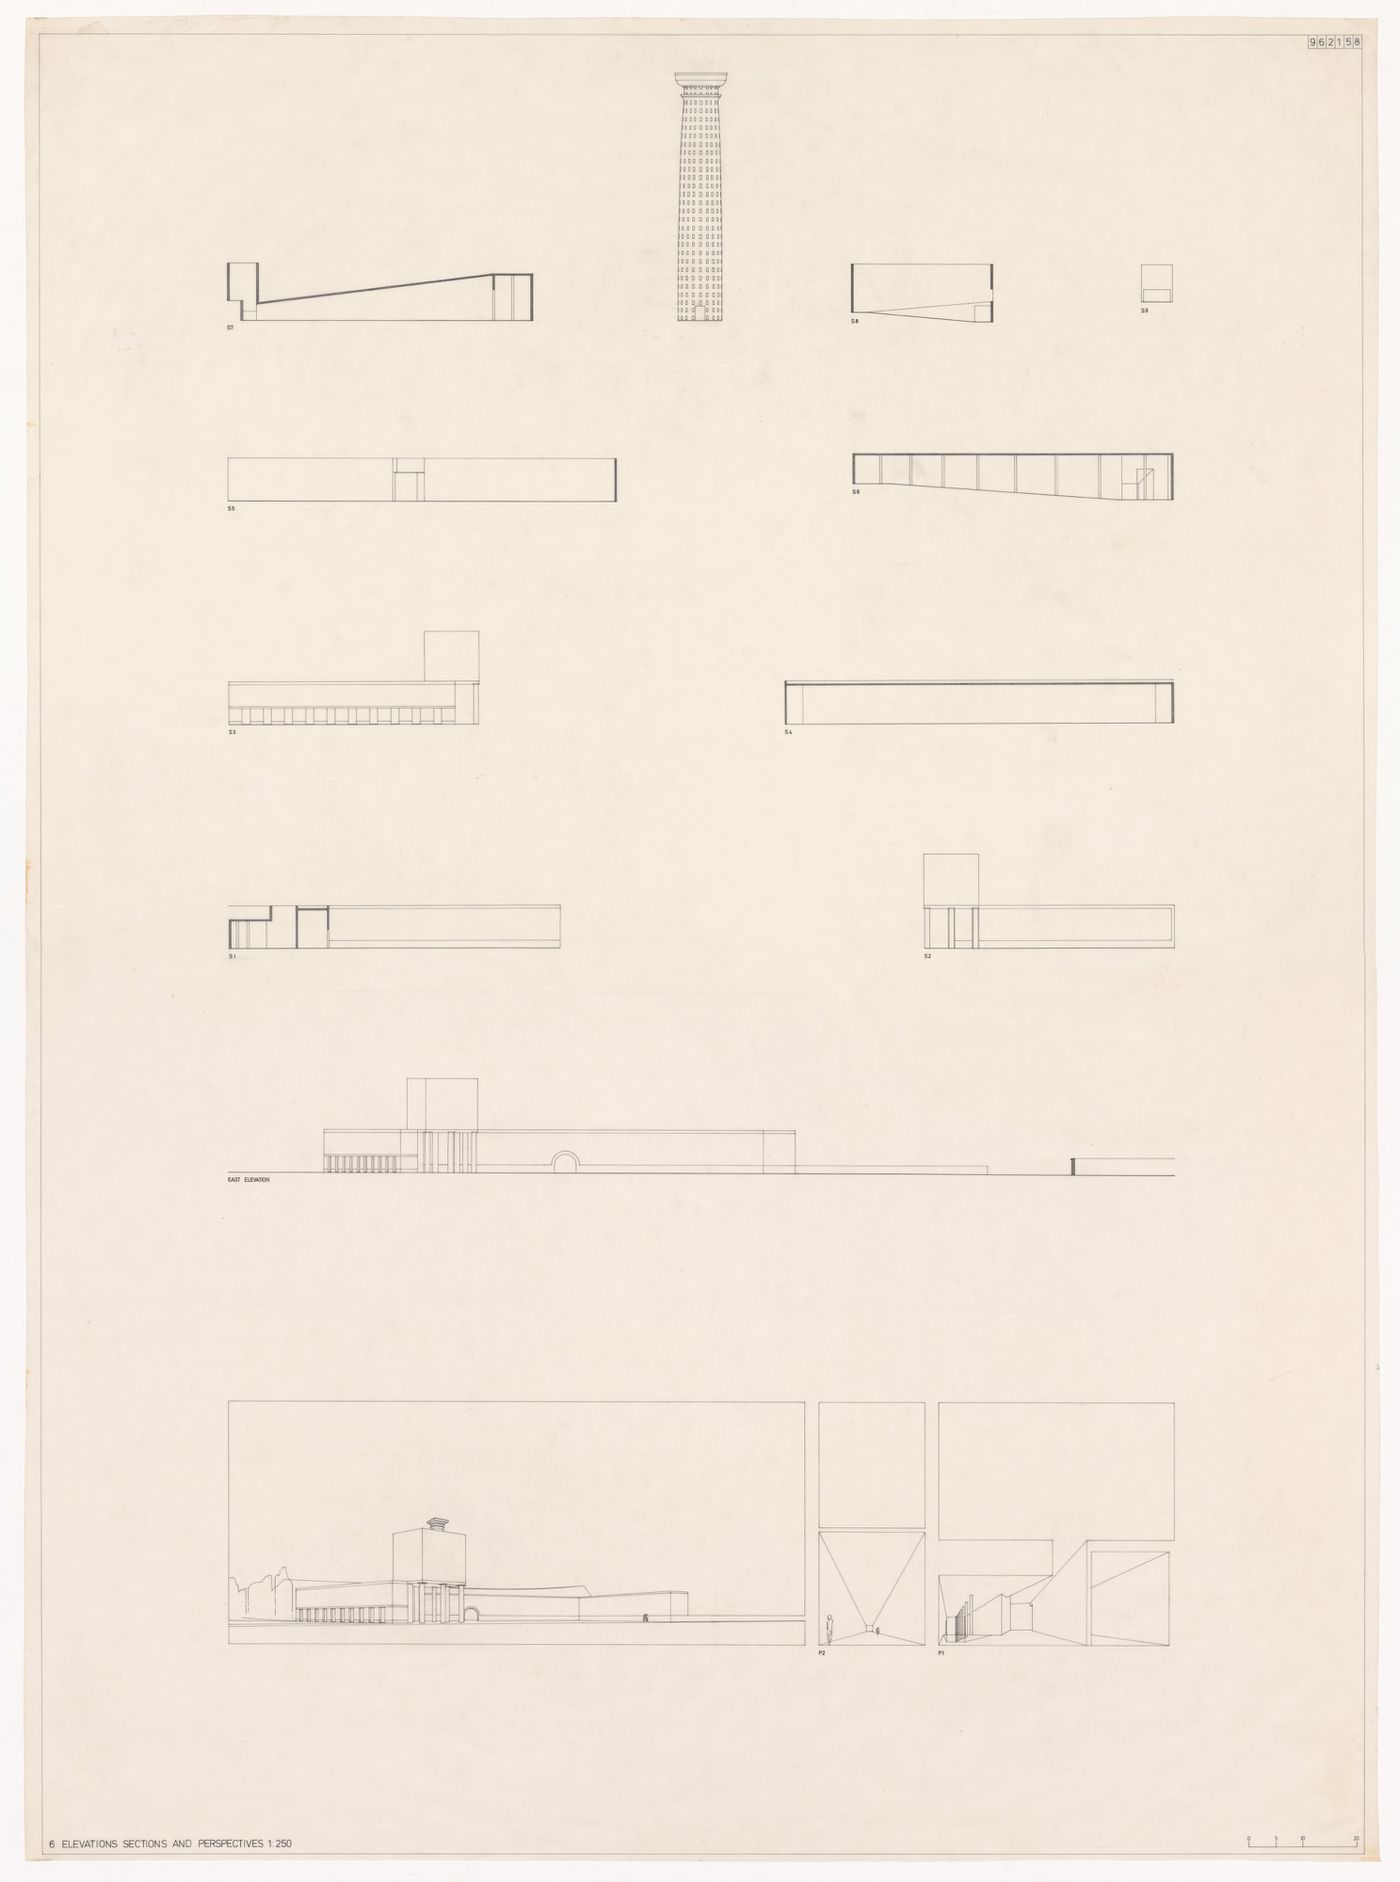 Elevations, sections, and perspectives for Monumento às vítimas da Gestapo [Monument to Gestapo victims], Prinz-Albrecht-Palais, Berlin, Germany